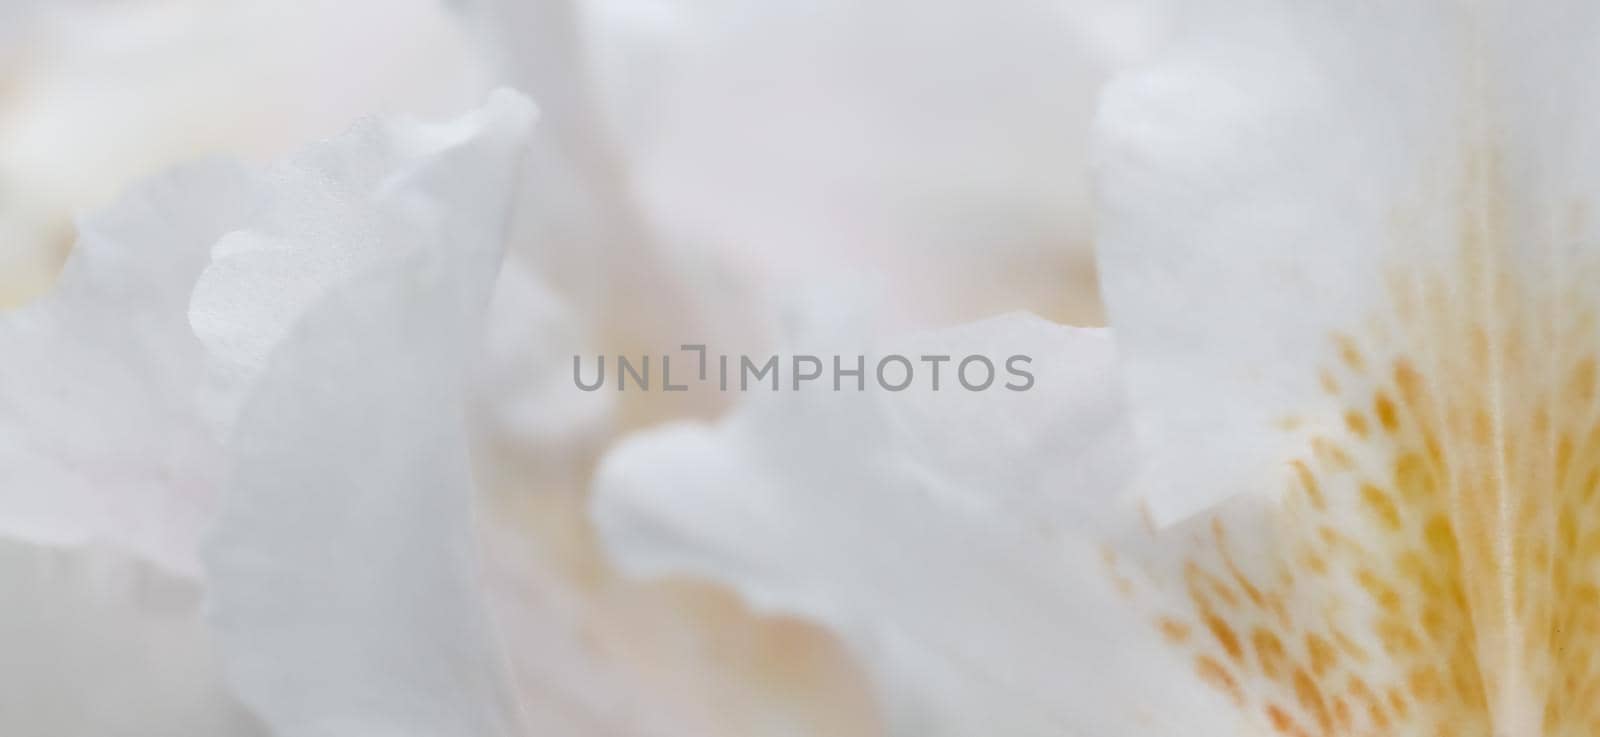 Botanical concept - Soft focus, abstract floral background, white Rhododendron flower petals. Macro flowers backdrop for holiday brand design